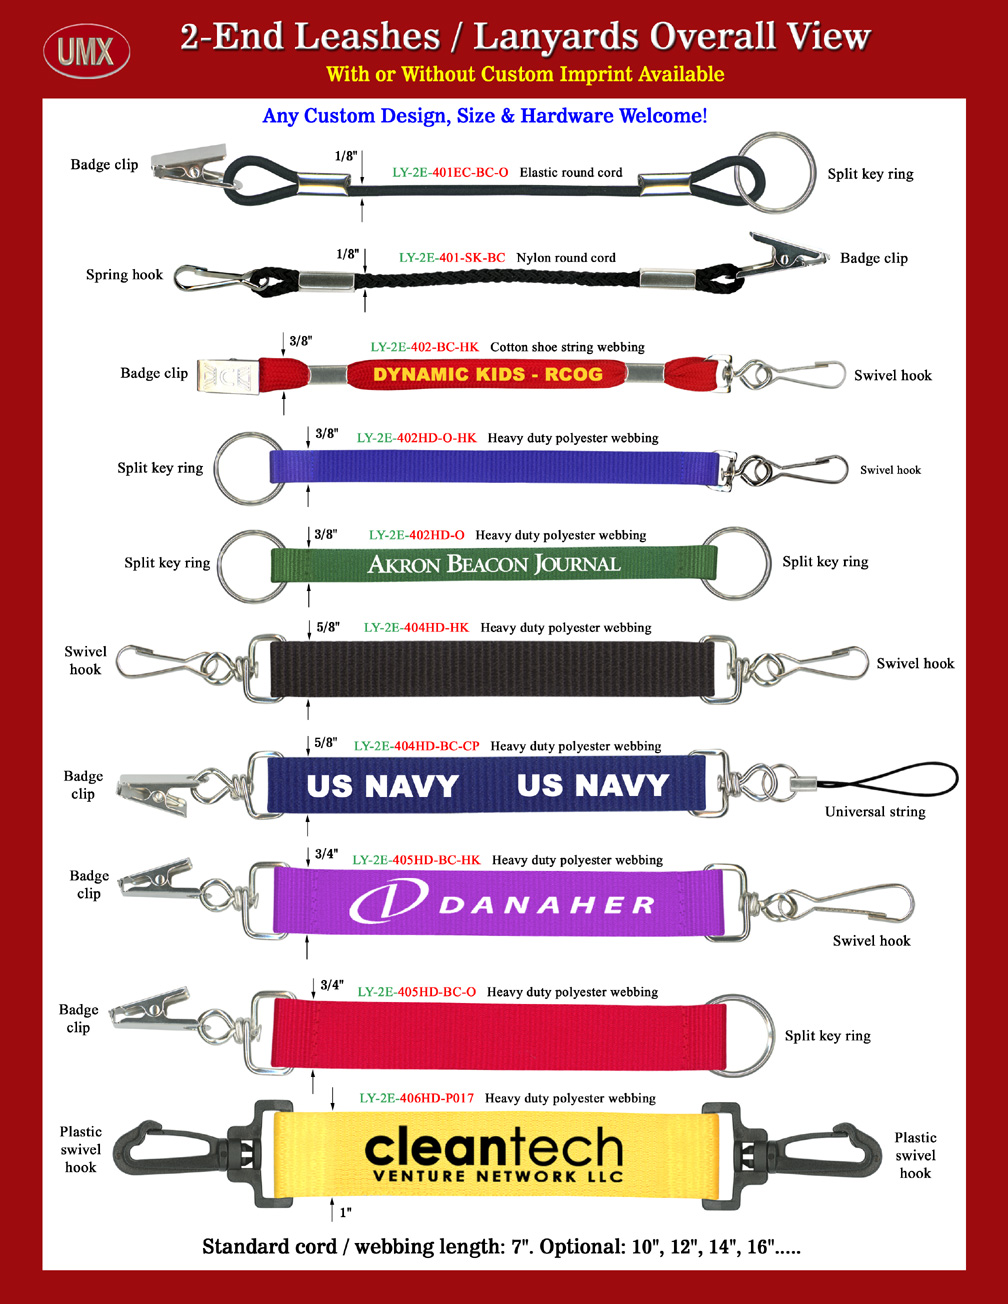 2-End Leash Lanyards - Overall View - 1/8", 3/8", 5/8", 3/4" and 1" Sample Applications.